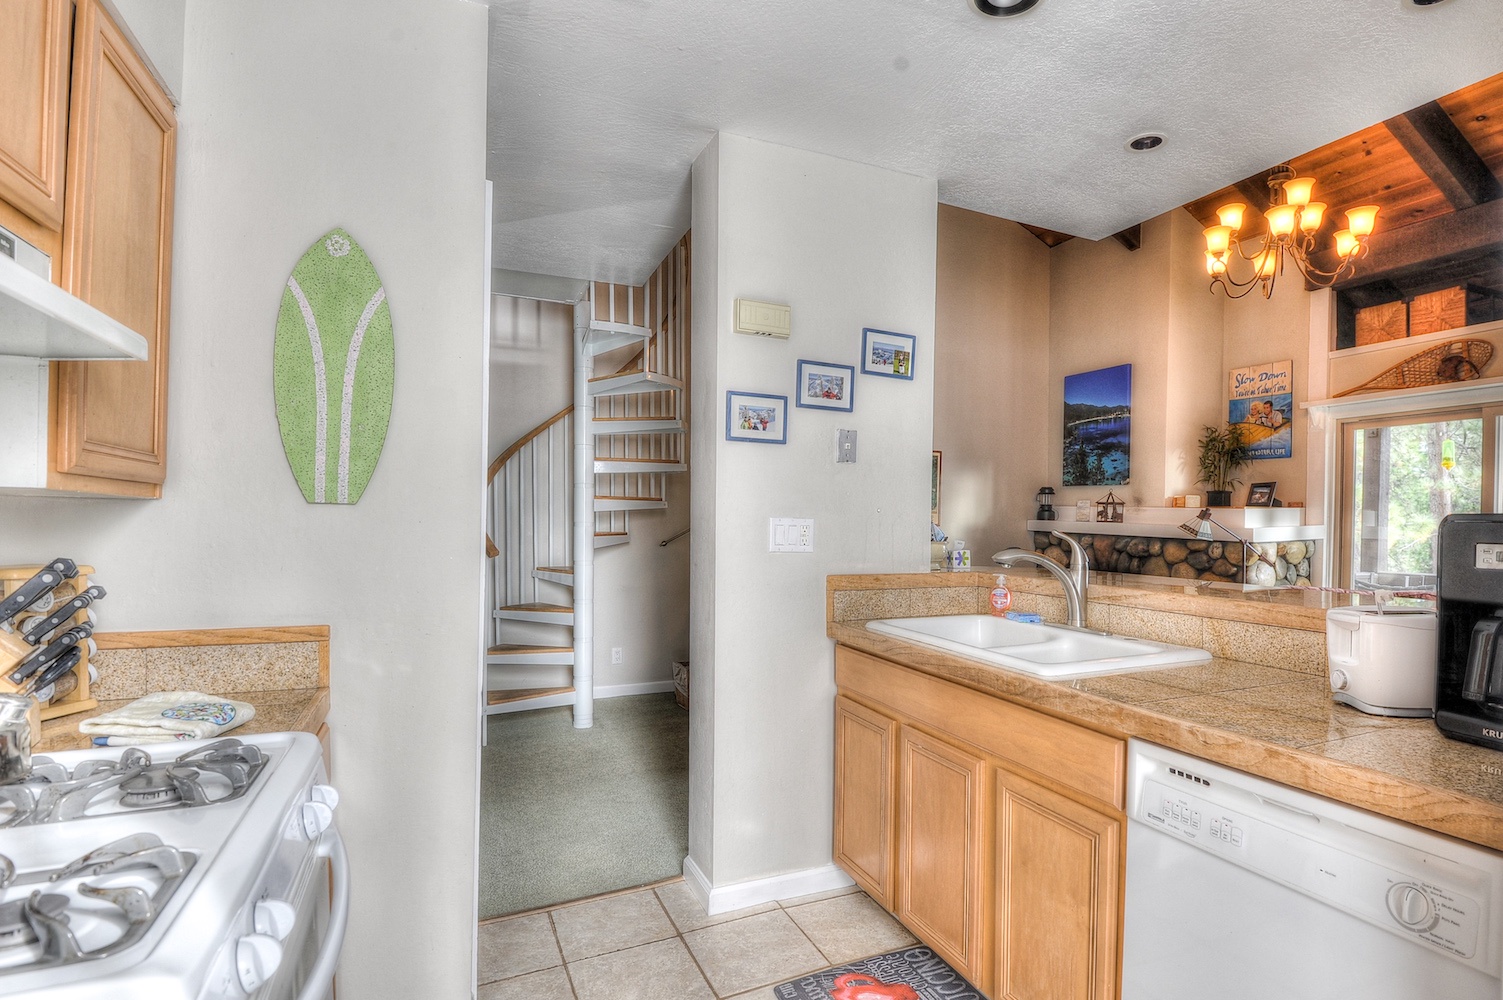 Fully equipped kitchen w/ toaster, drip coffee maker, slow cooker, blender, spices, and more!